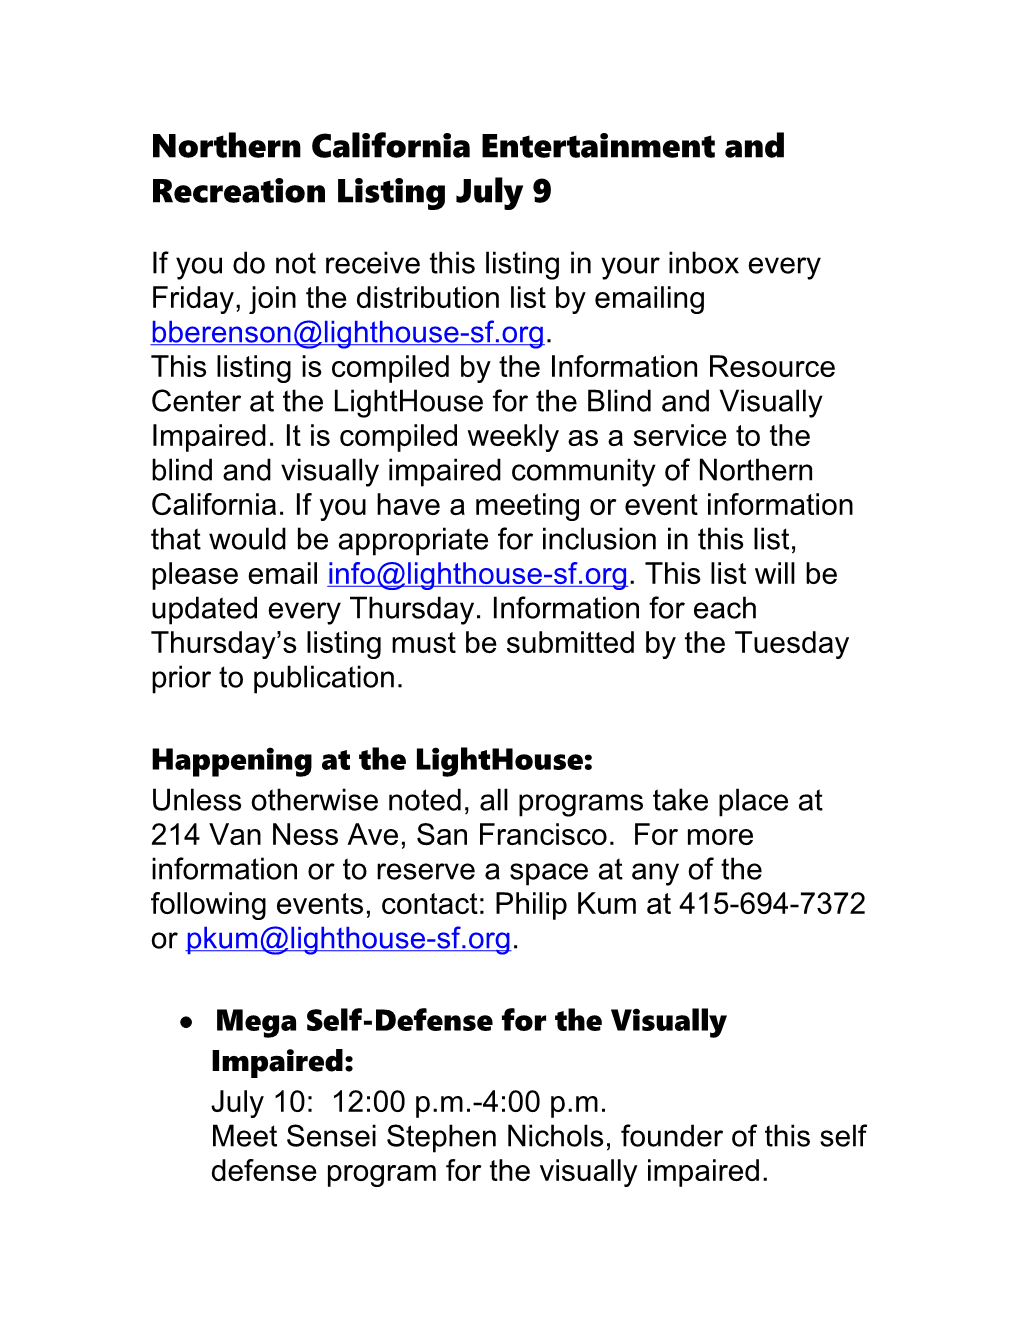 Northern California Entertainment and Recreation Listing July 9